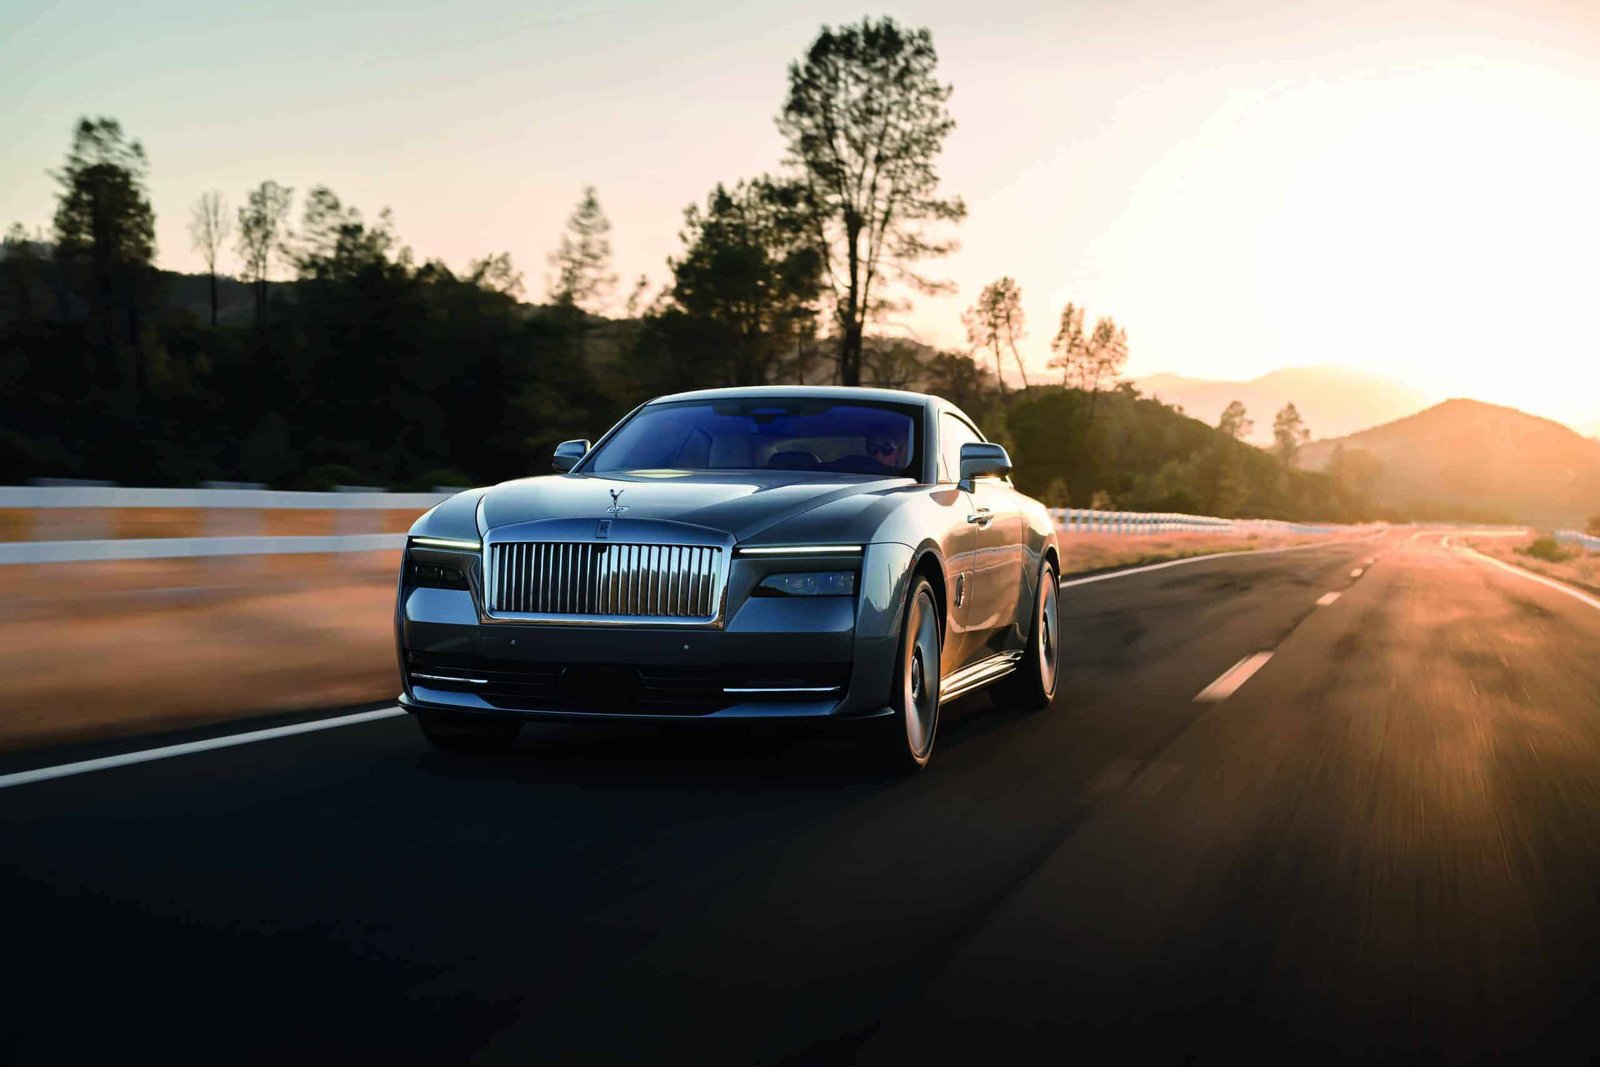 The Spectre model of the Rolls Royce Phantom is driving down the road.